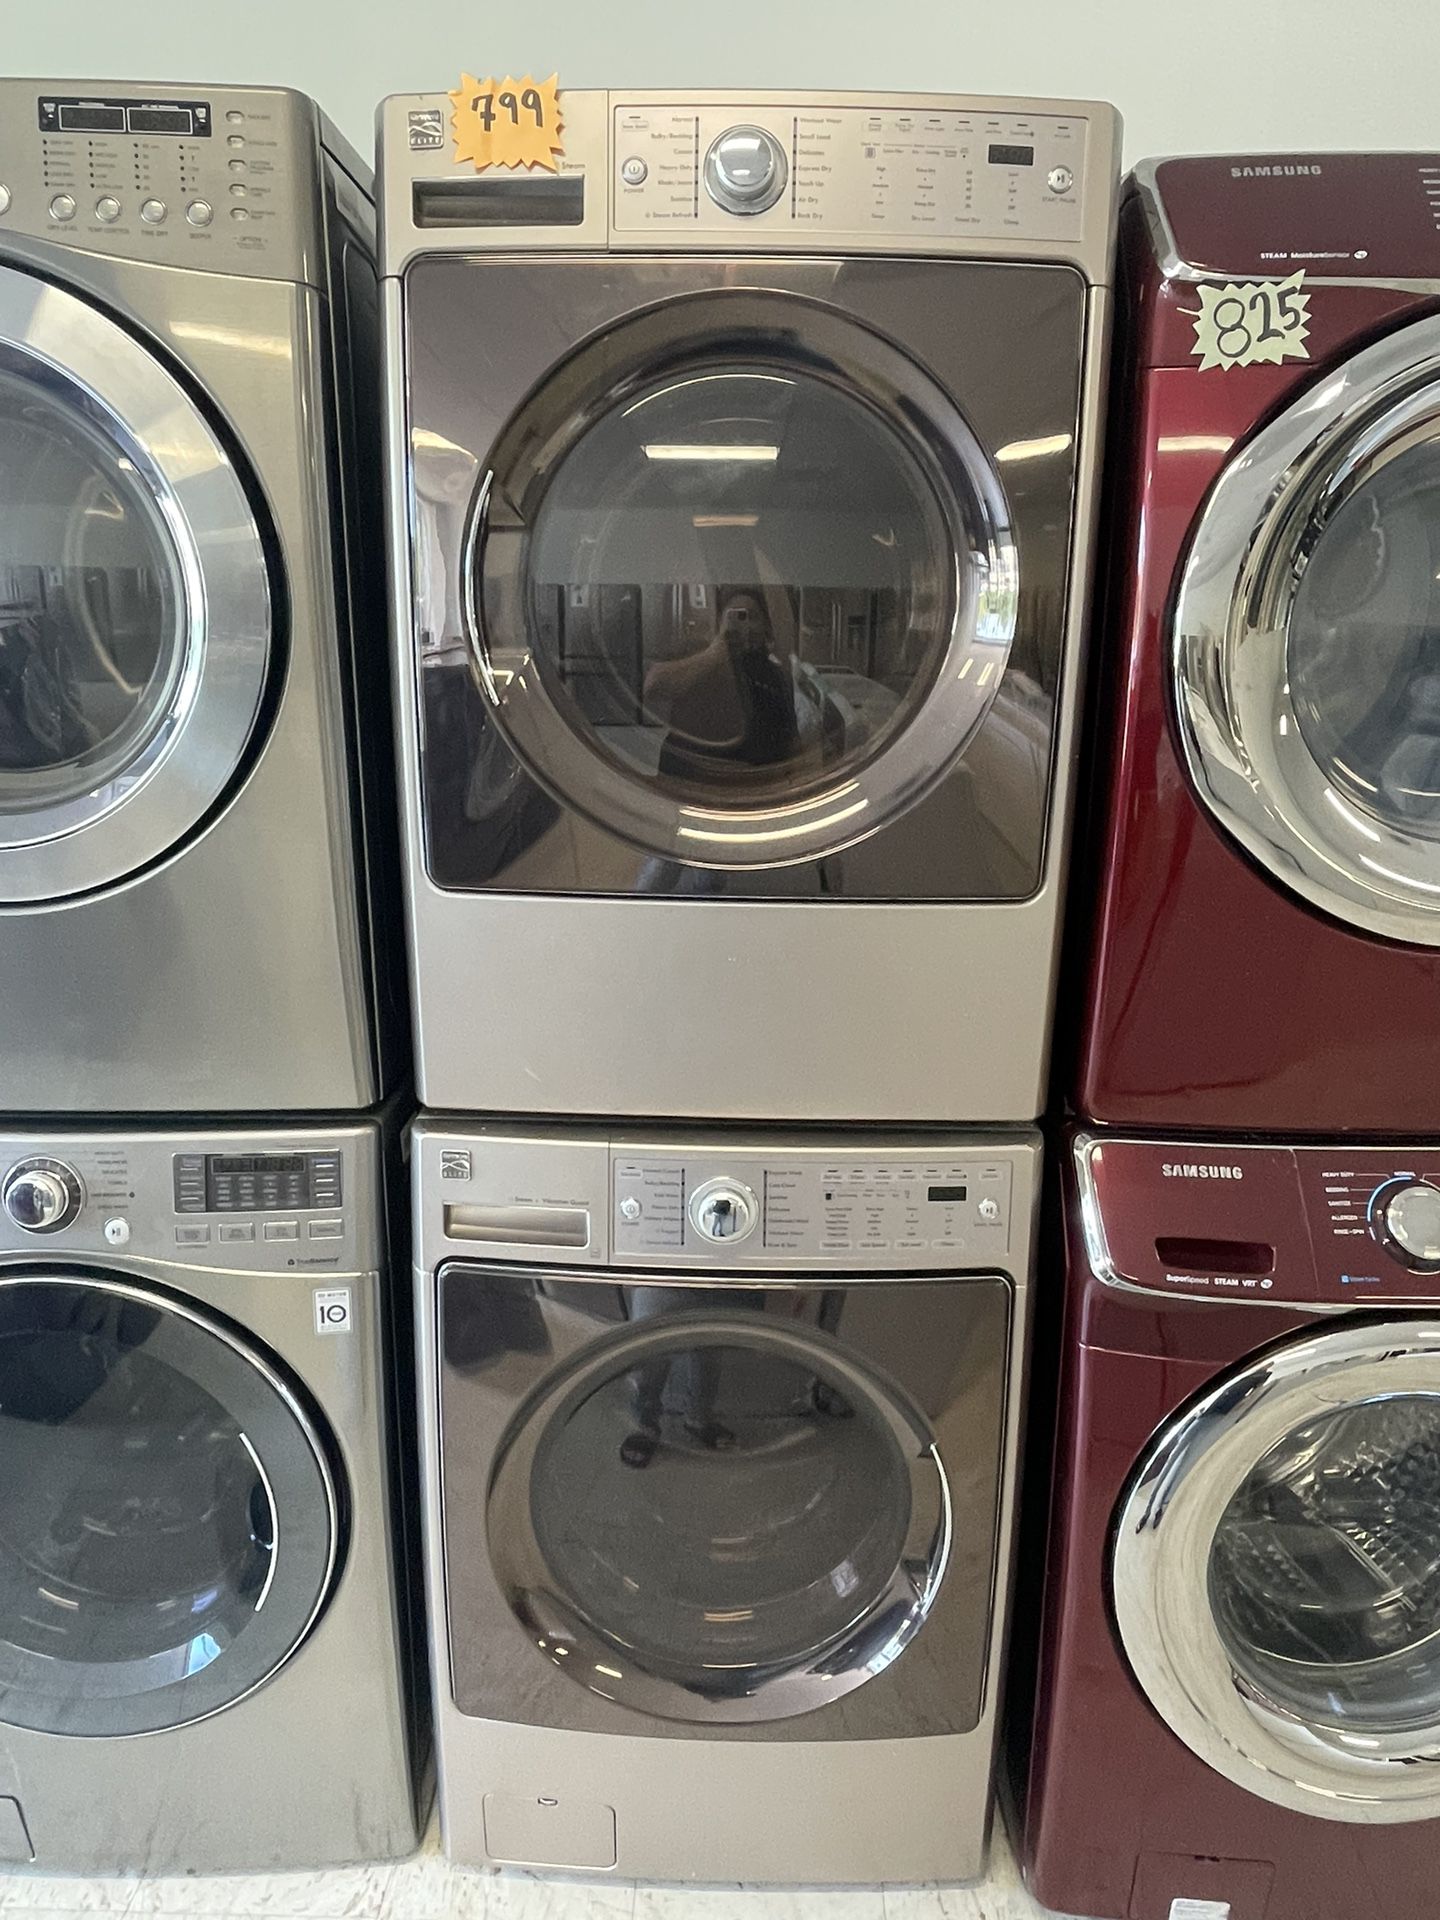 Kenmore Front Load Washer And Electric Dryer Set Used Good Condition With 90days Warranty 